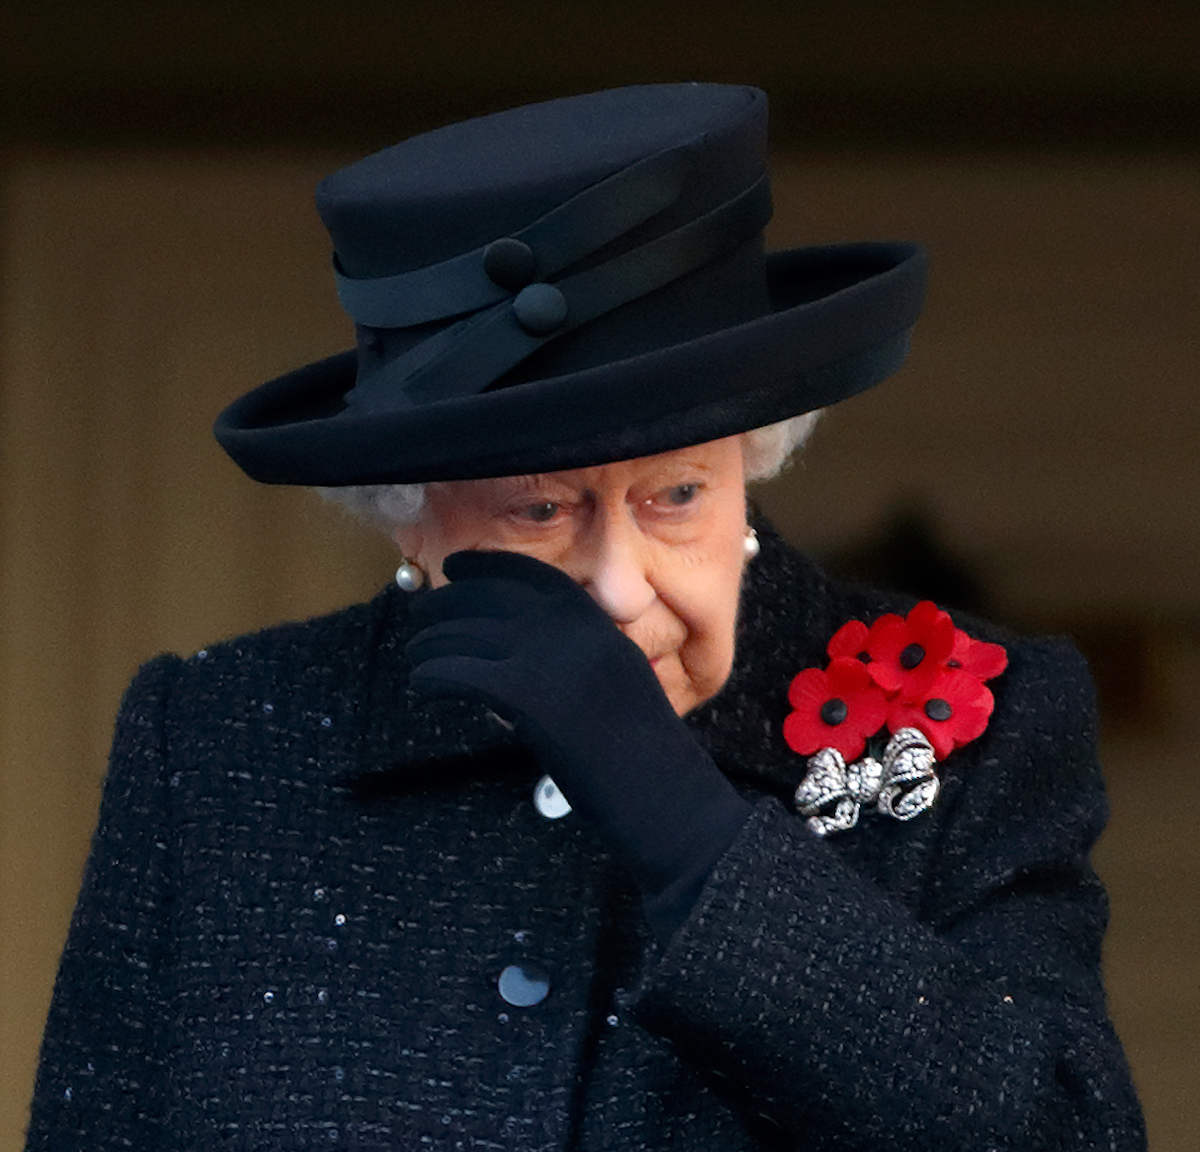 Queen Elizabeth Rarely Cries in Public, But 1 Clue Proves She Could Break Down at Prince Philip's Funeral